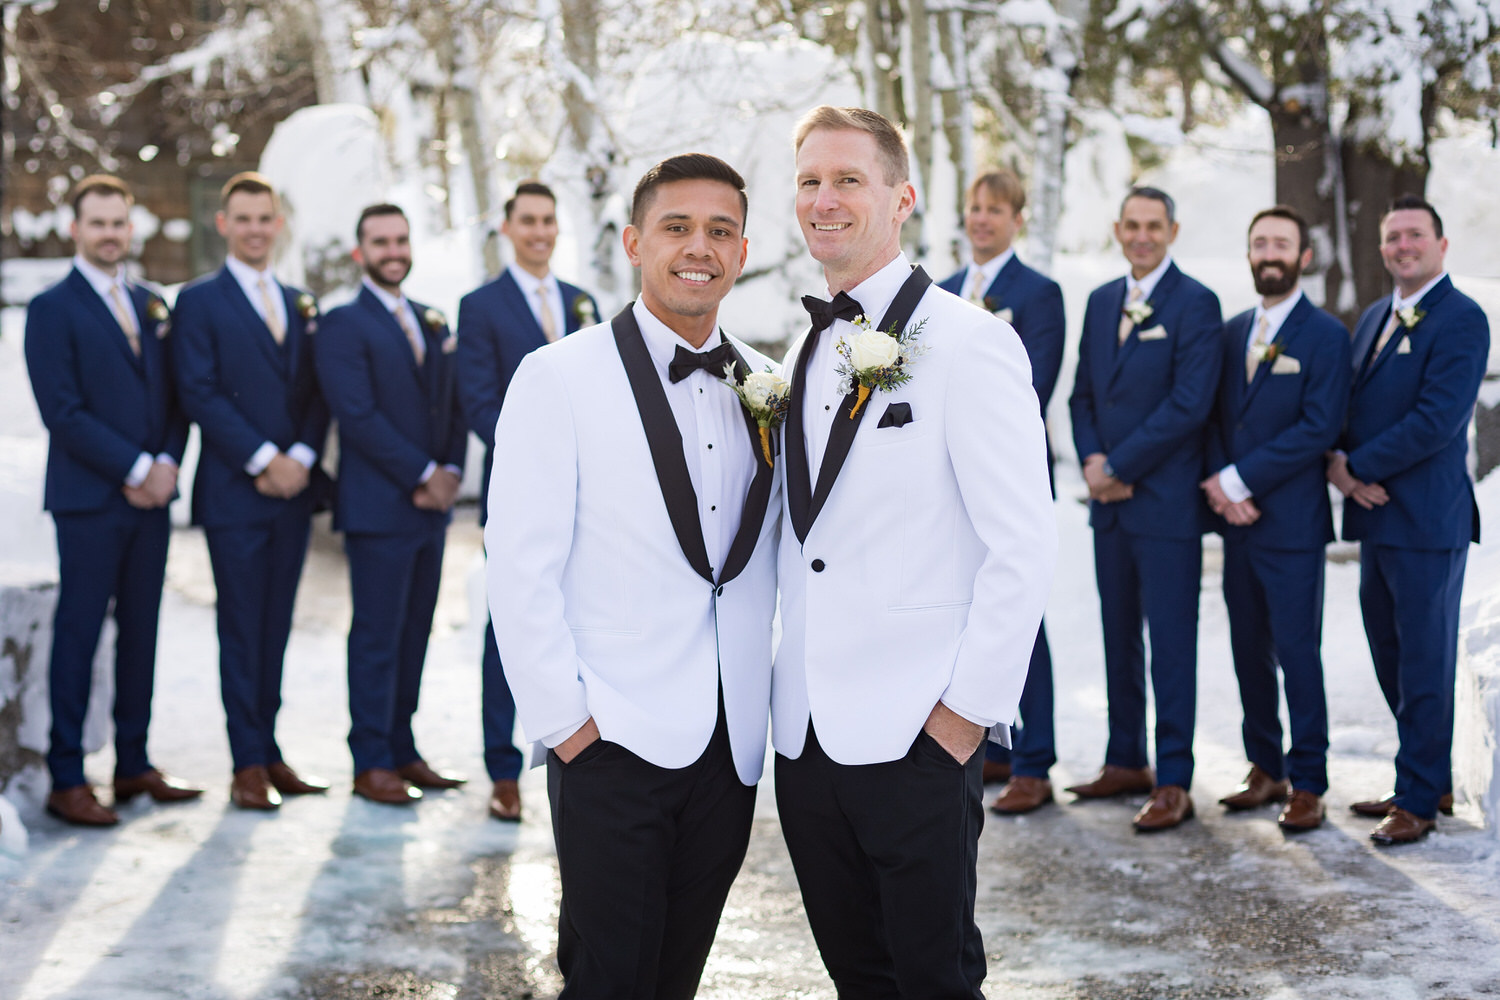 Two grooms and their wedding party at a PlumpJack Inn winter portrait location.